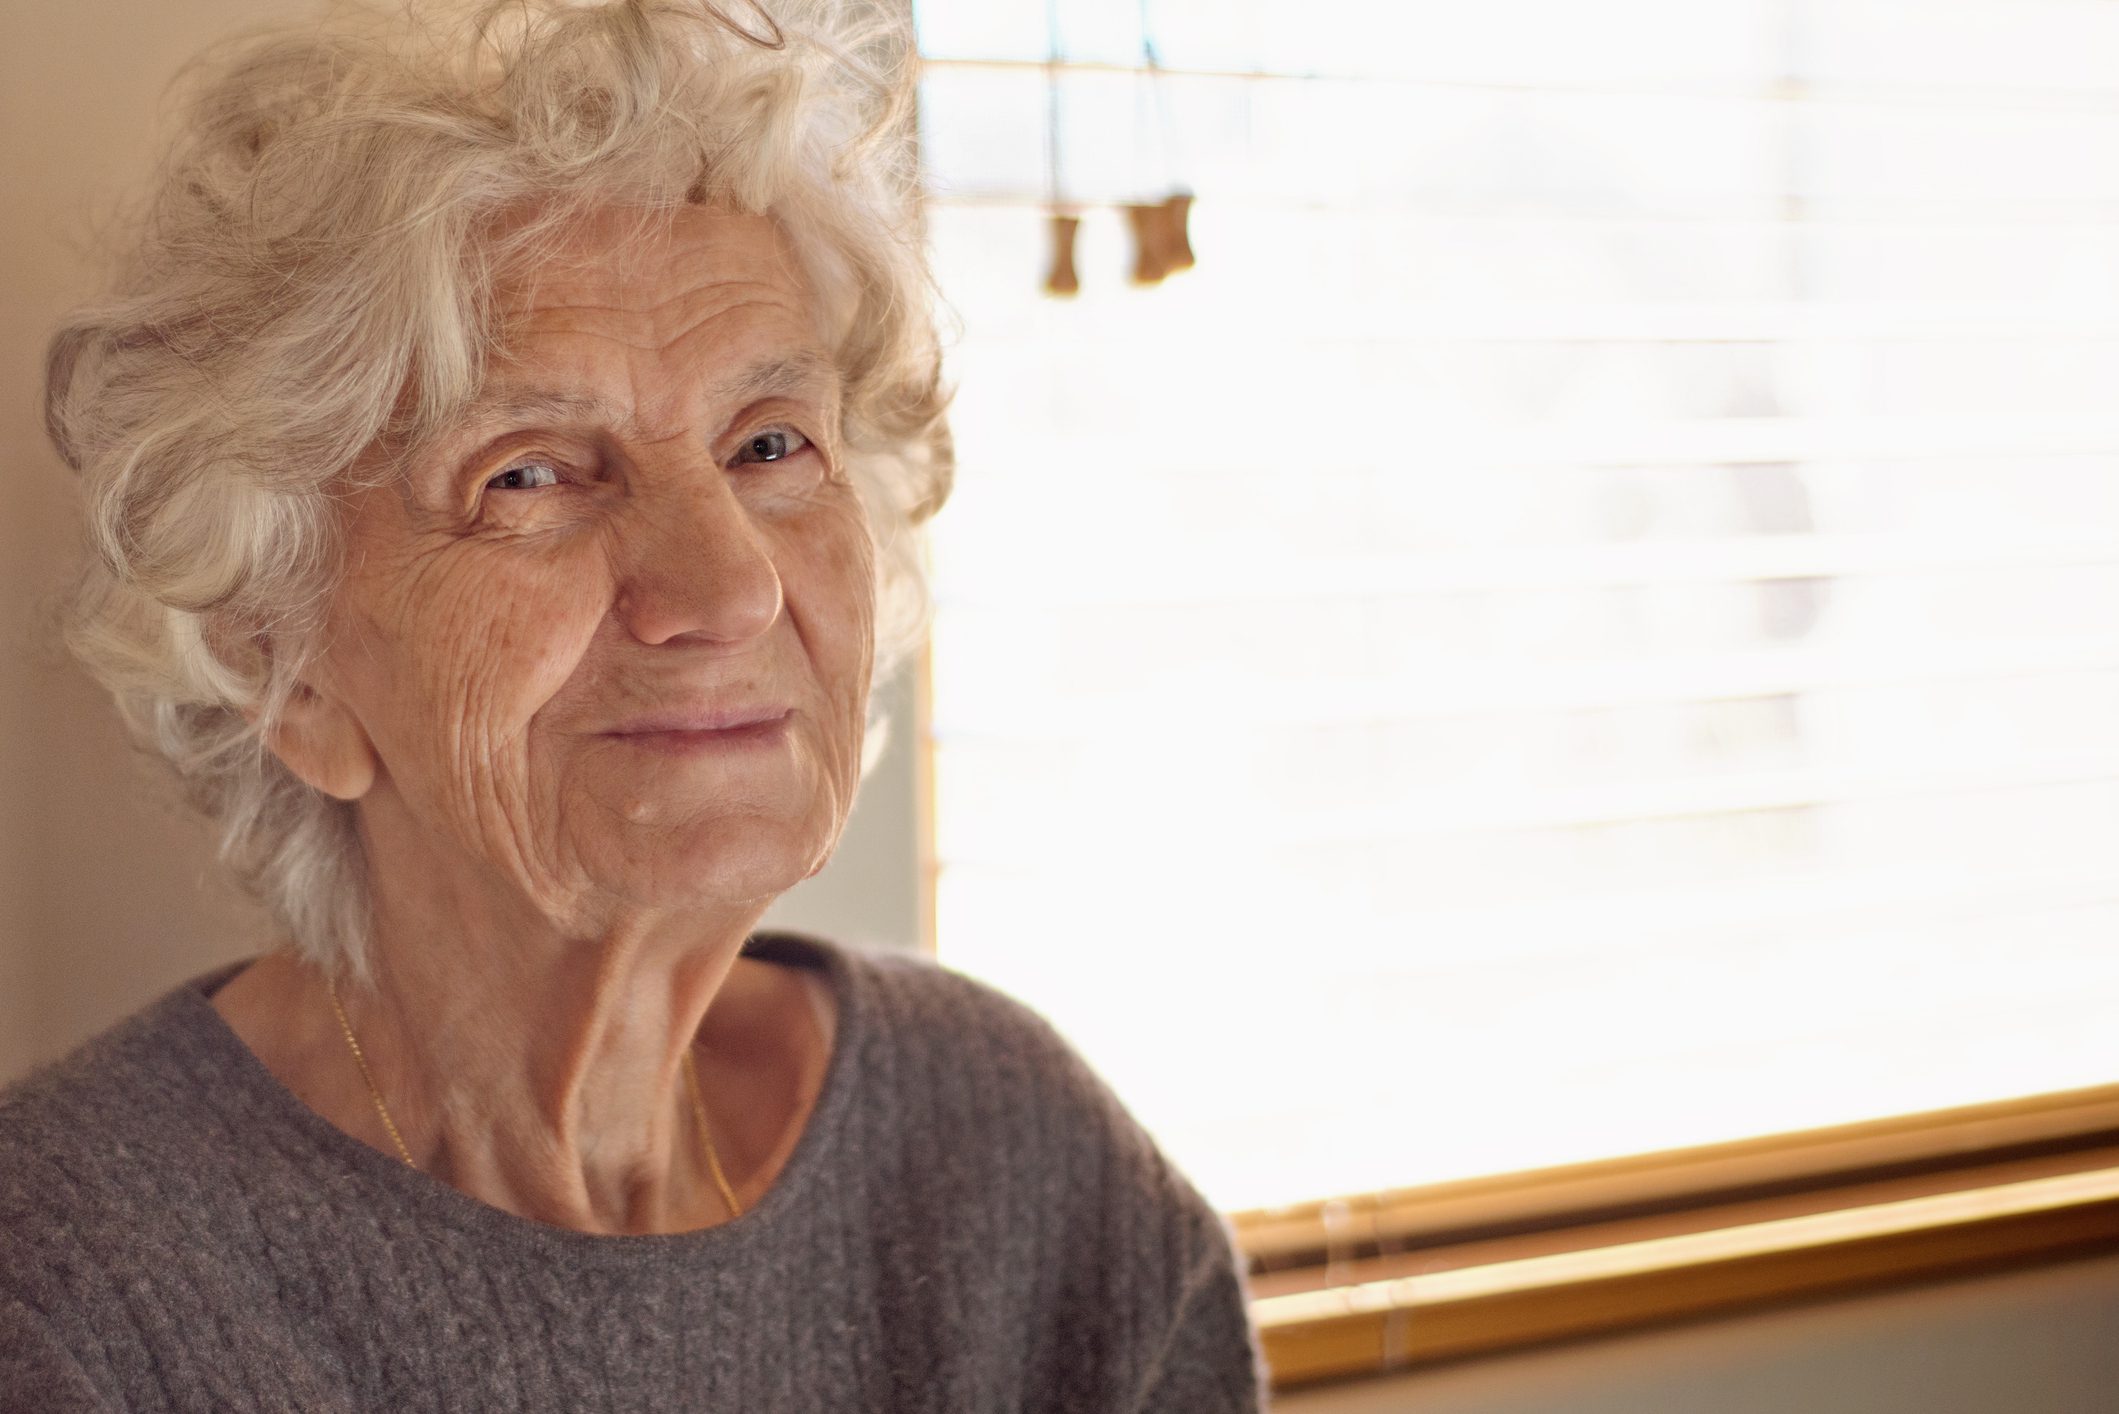 Stock image of an older woman smiling used for our Winter Appeal.